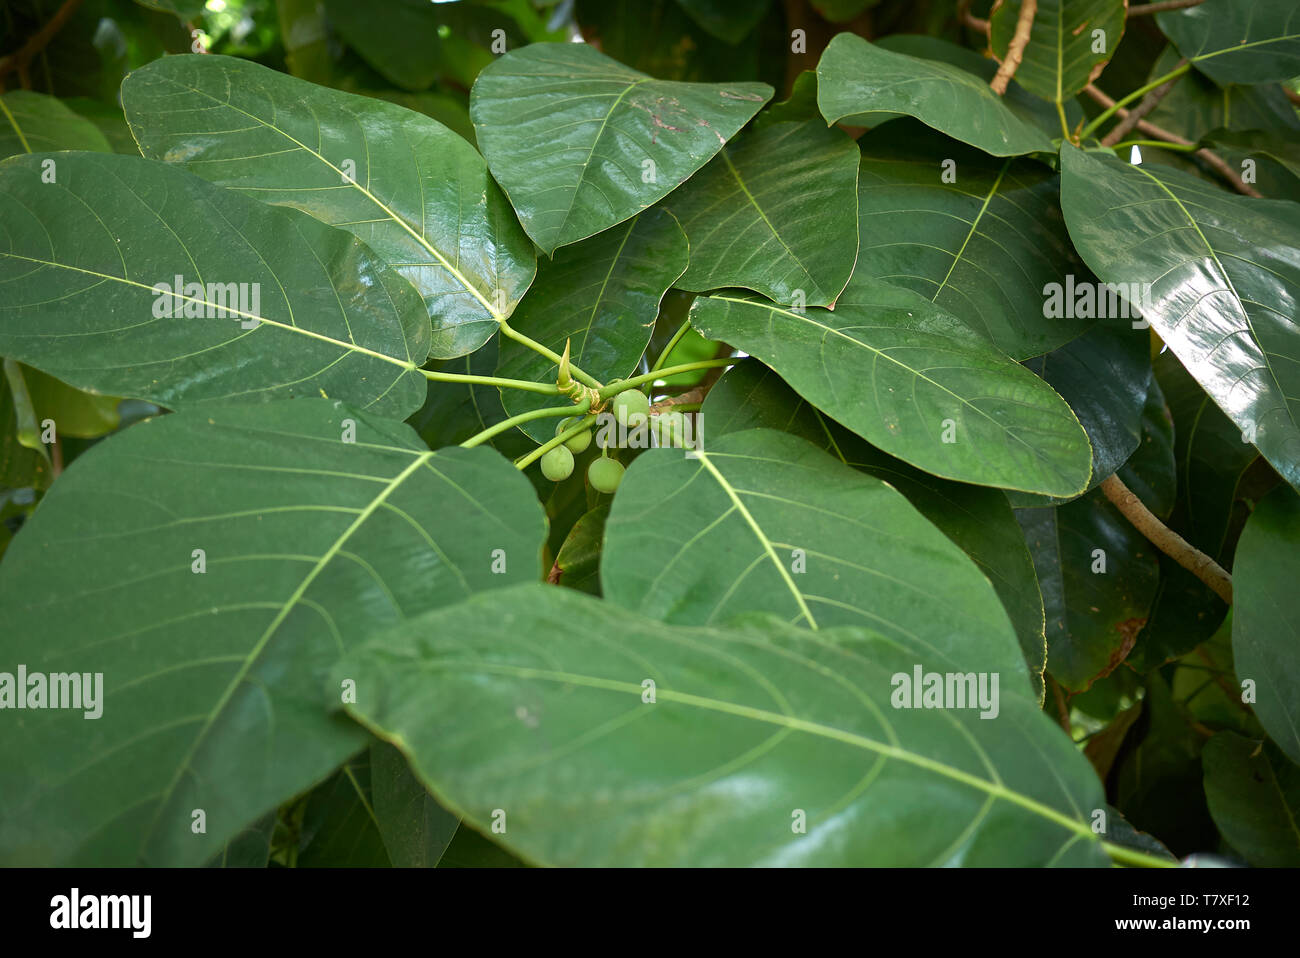 Ficus magnifolia branch with fruits Stock Photo